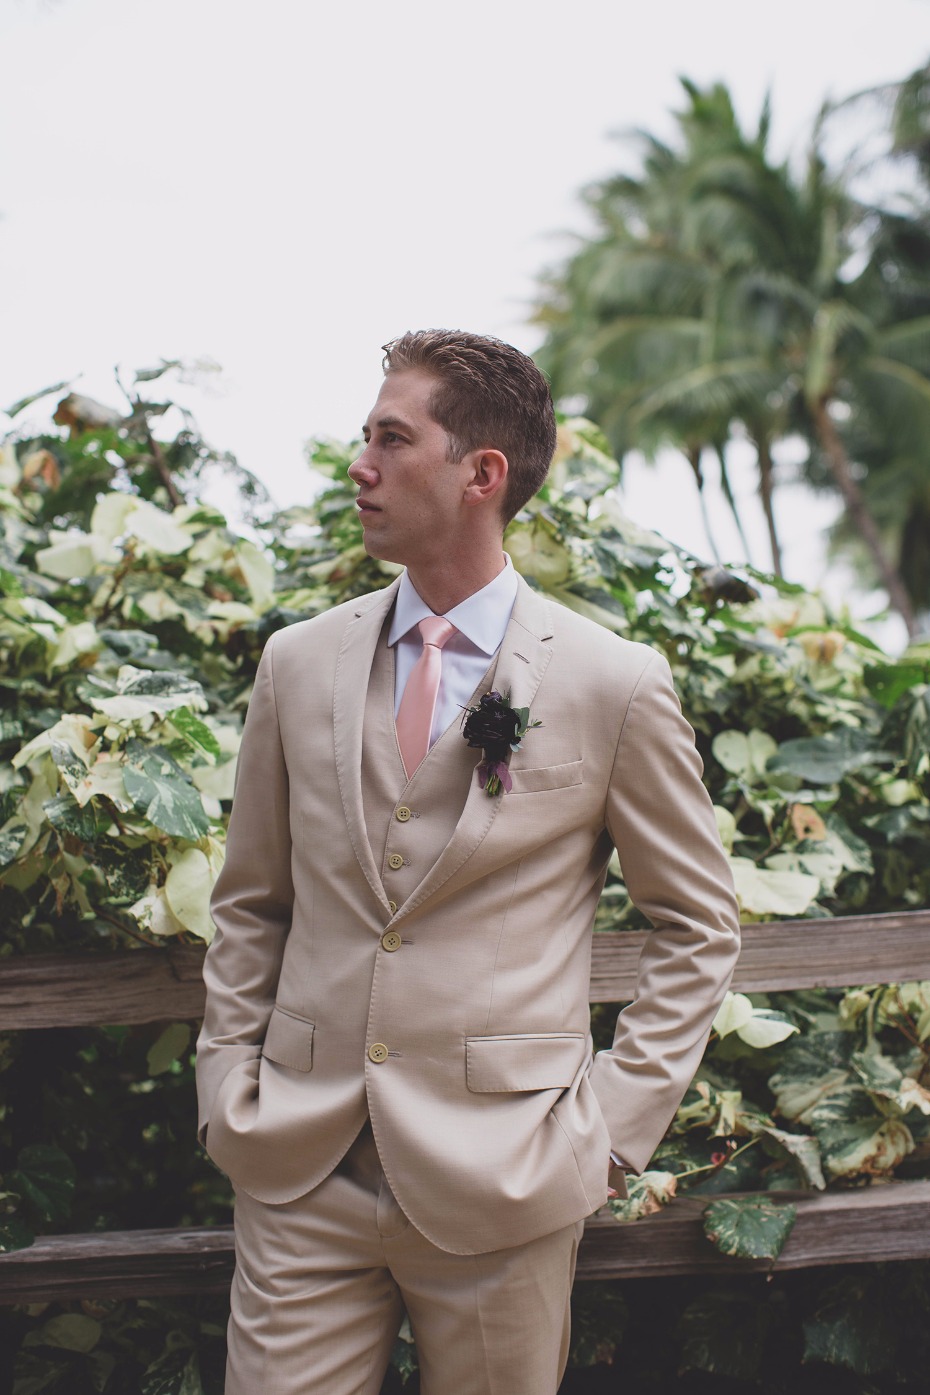 Tan suit and pink tie